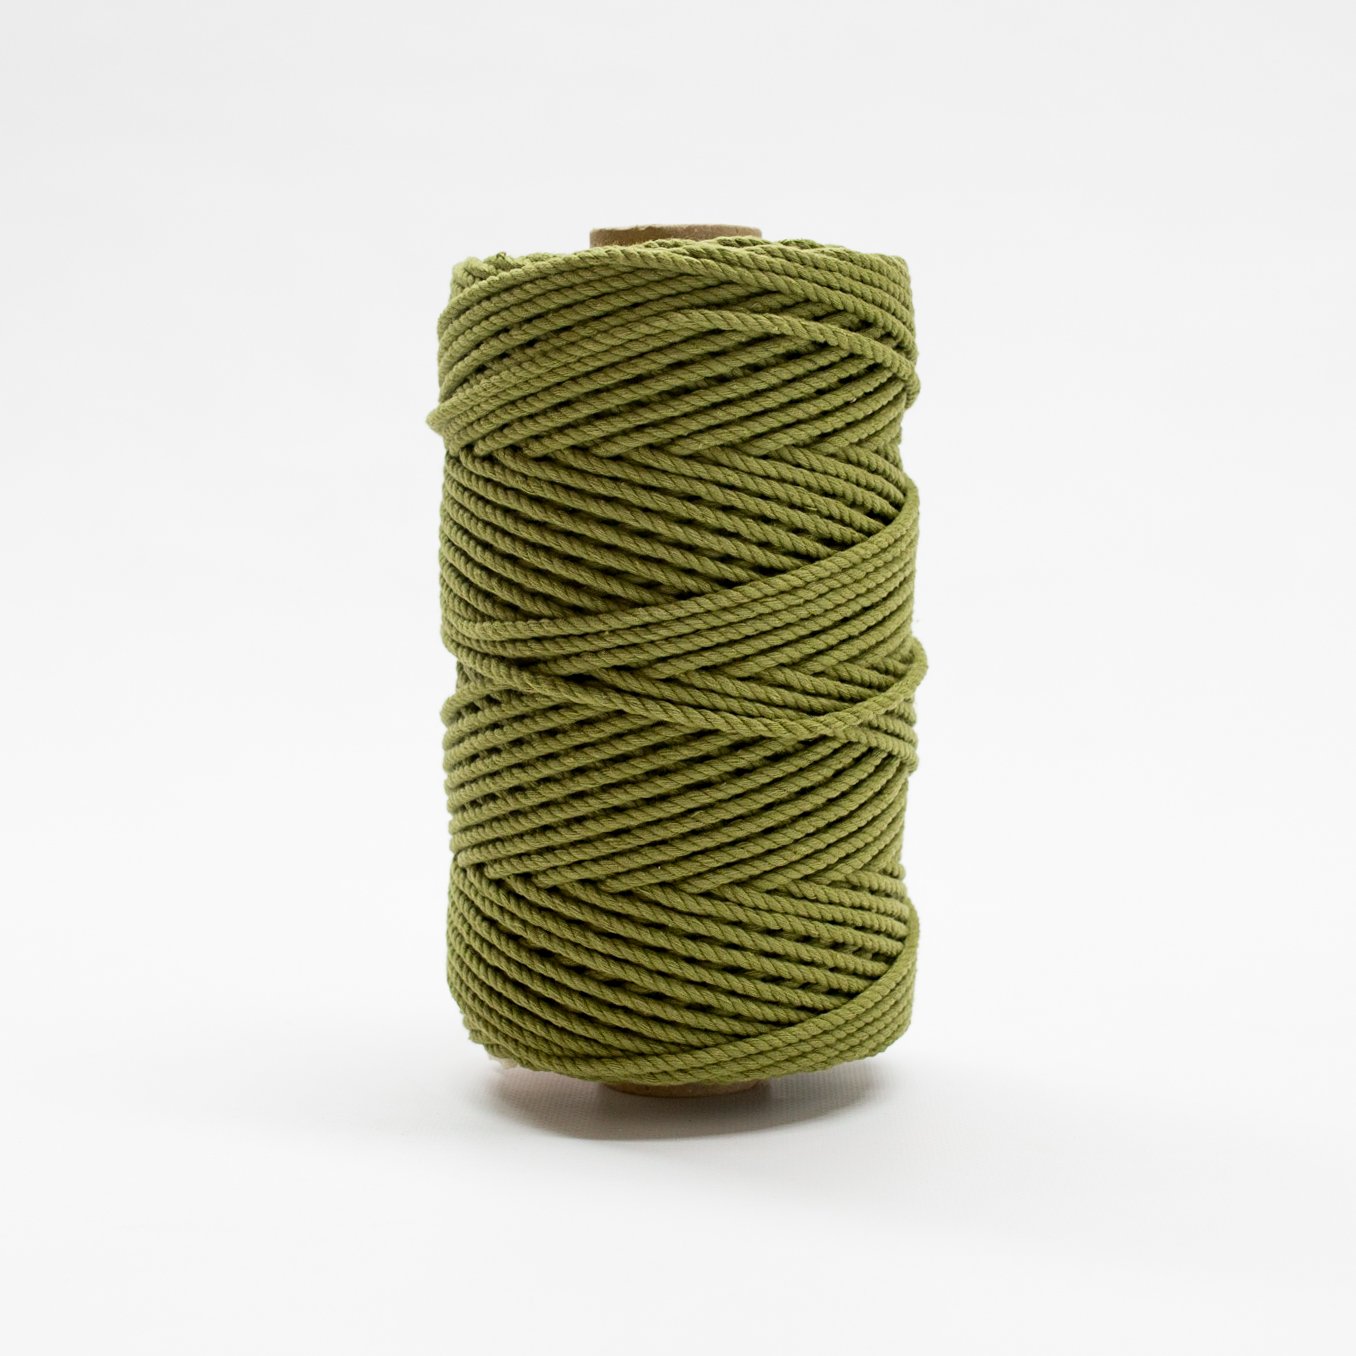 Mary Maker Studio Luxe Colour Cotton 4mm 1KG Recycled Luxe Macrame Rope // Olive Green macrame cotton macrame rope macrame workshop macrame patterns macrame